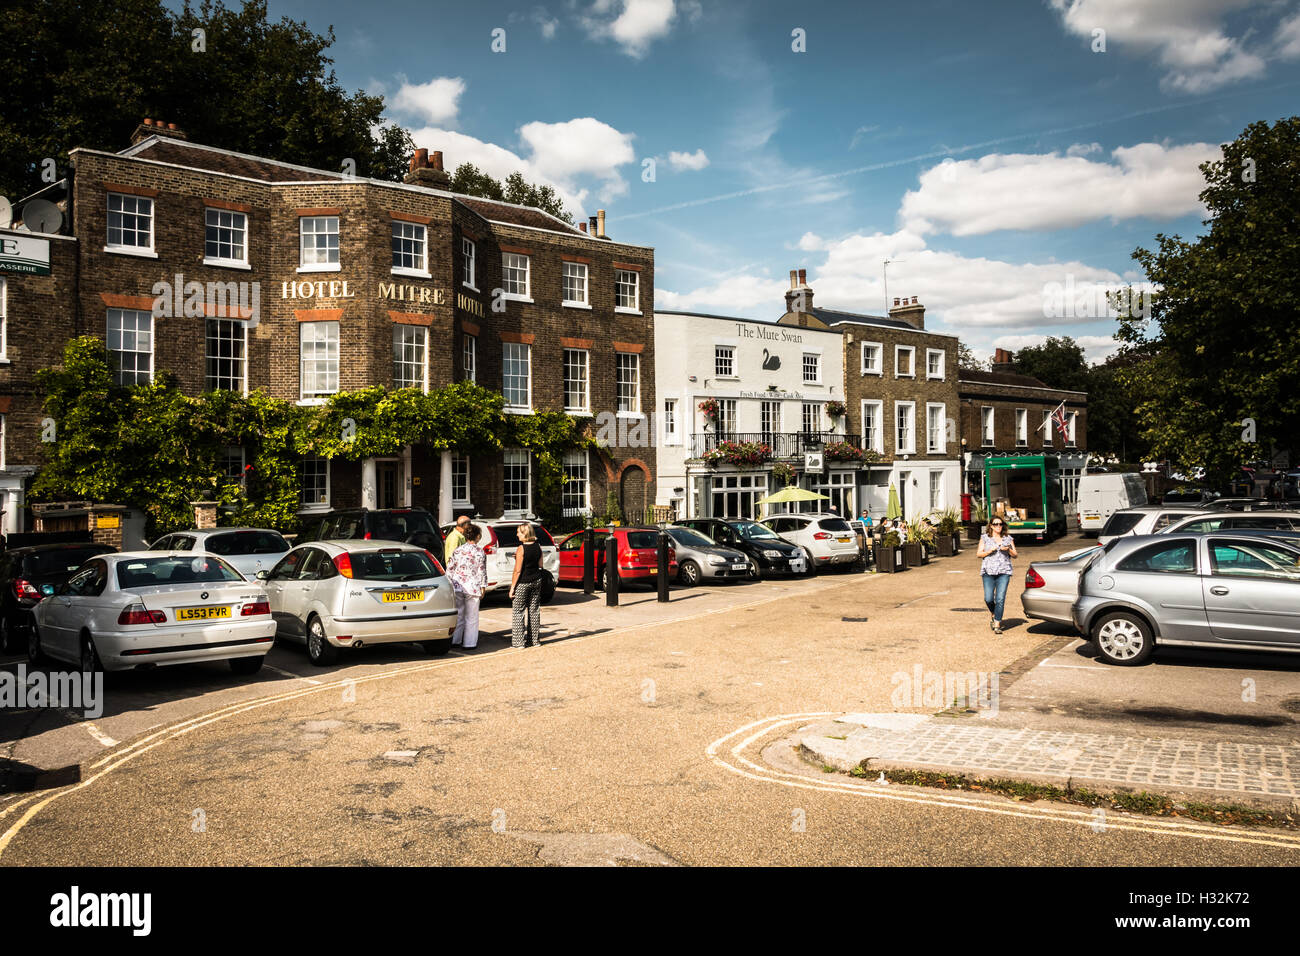 The Mitre Hotel on the River Thames in East Molesey, near Hampton Court Palace, Surrey, UK Stock Photo